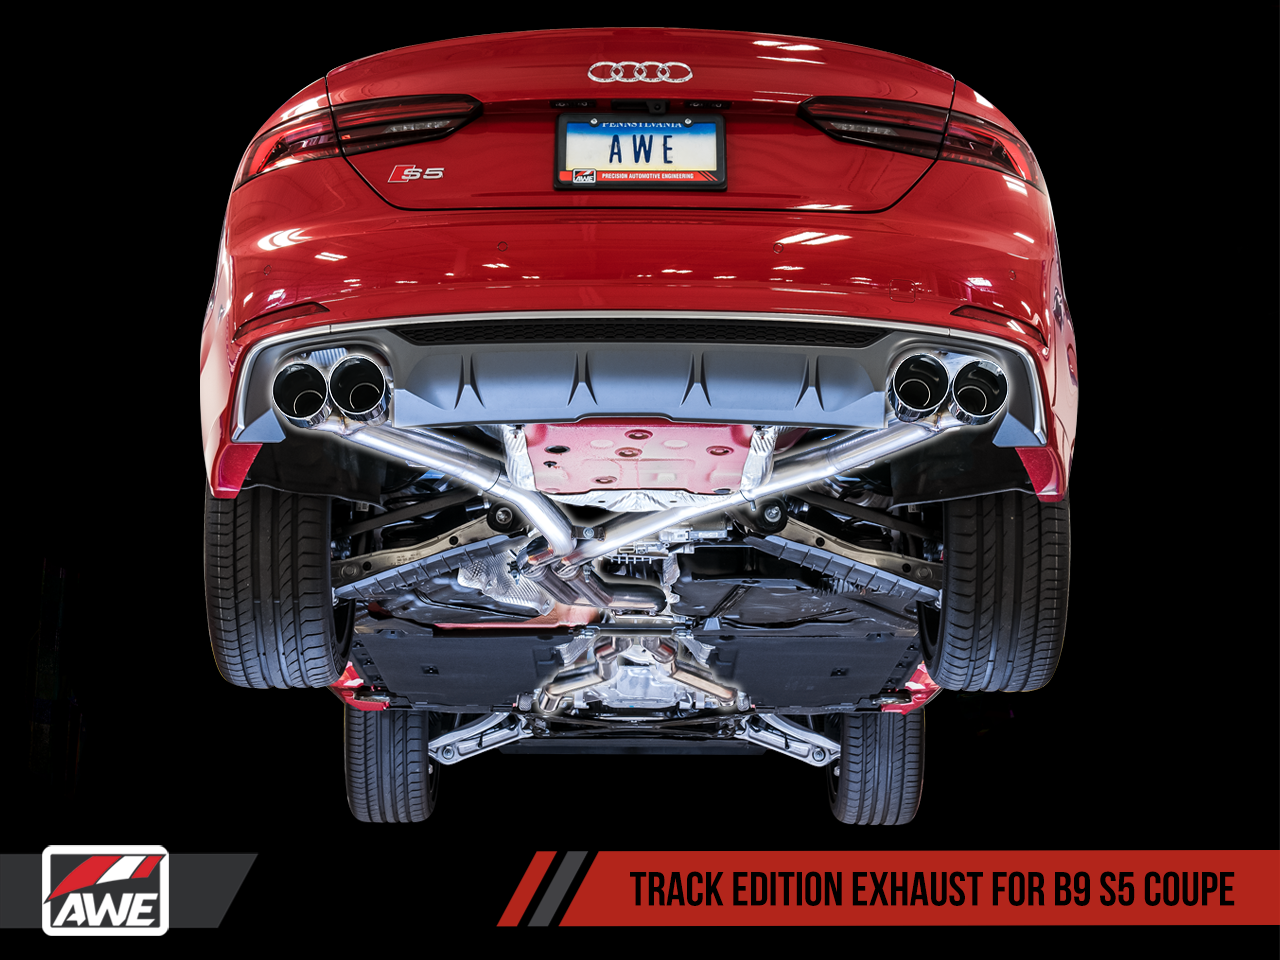 AWE Touring Edition Exhaust for B9 S5 Coupe - Resonated for Performance Catalyst - Motorsports LA